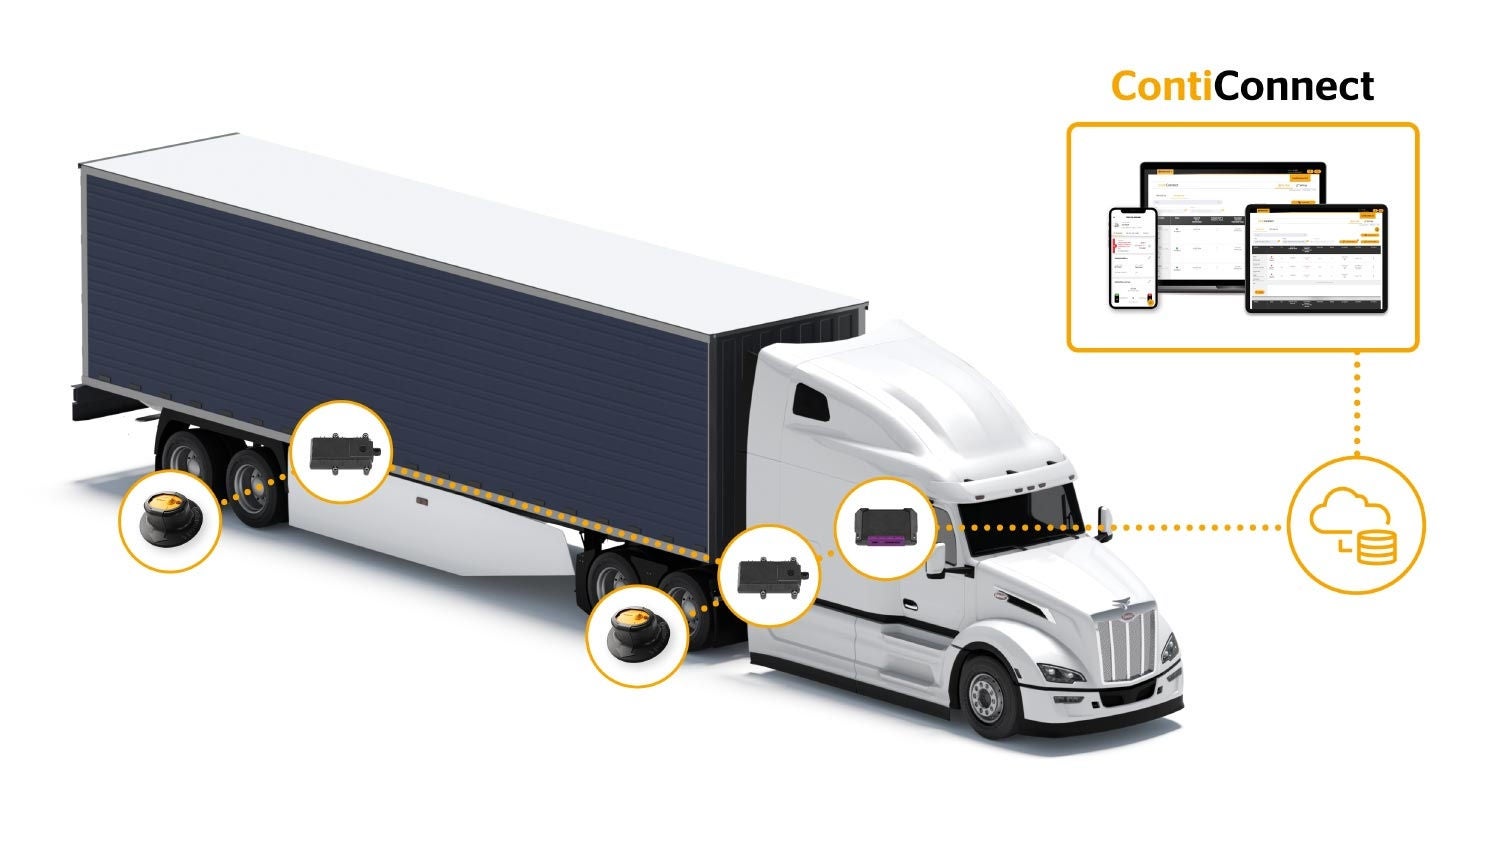 ContiConnect Live components on a truck